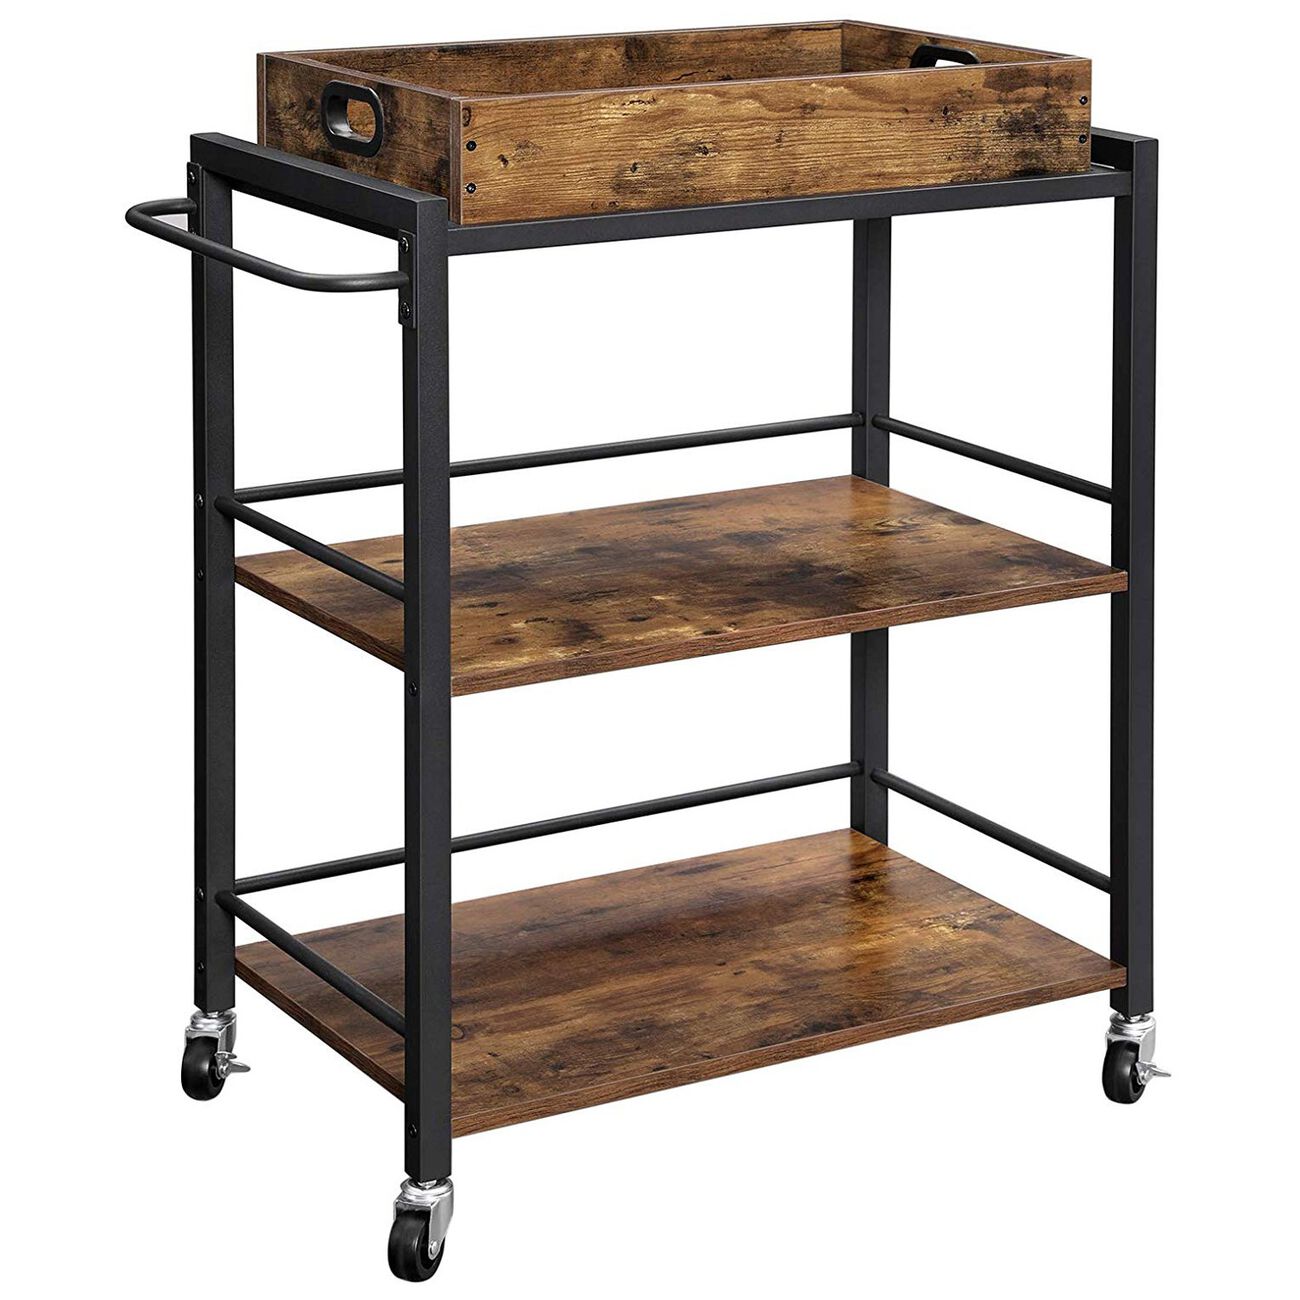 Tray Top Wooden Kitchen Cart with 2 Shelves and Casters, Brown and Black